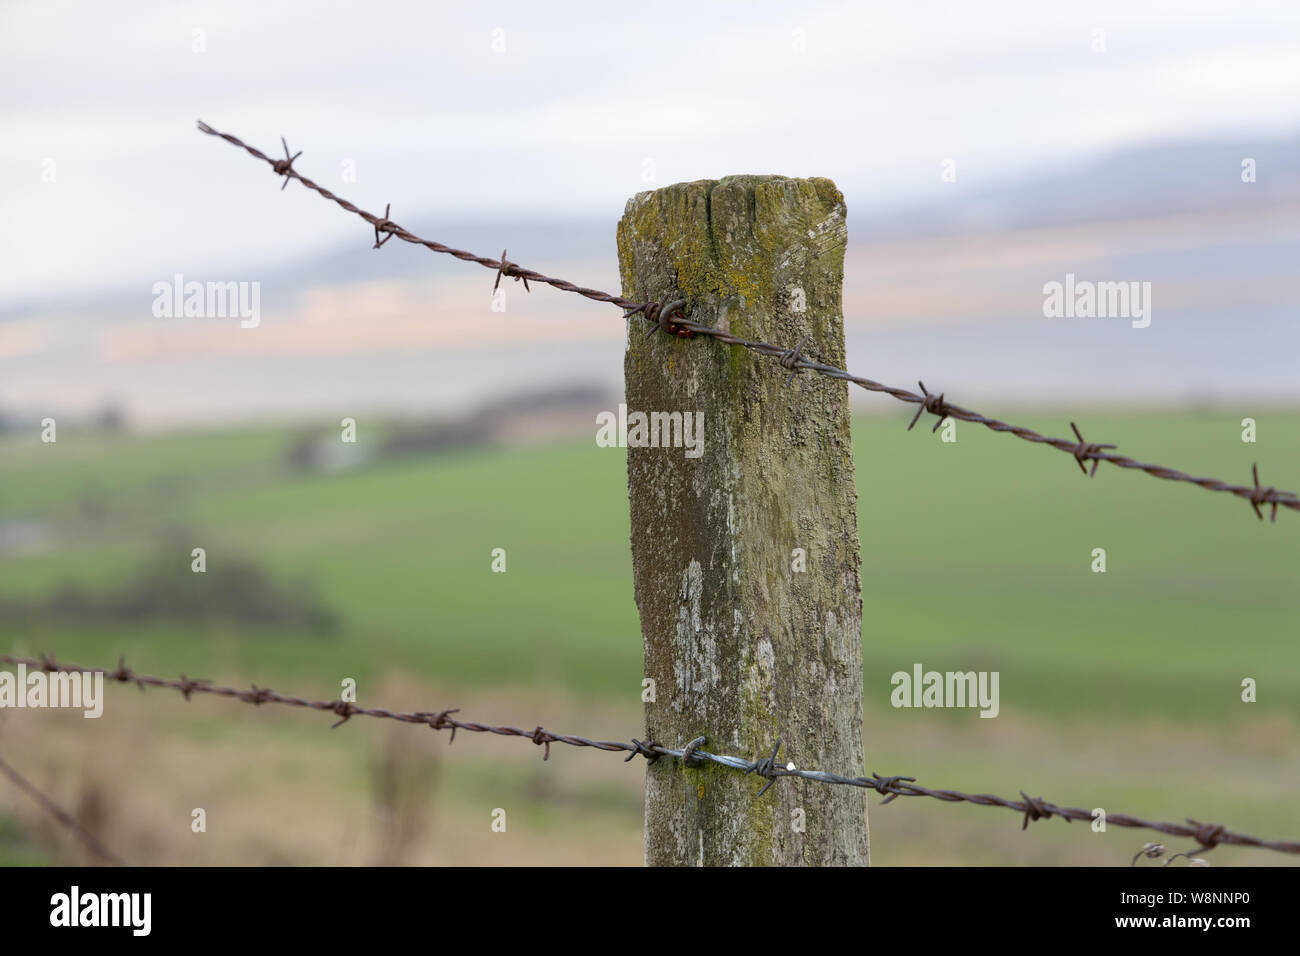 Broken rusted barbed wire on wooden post, close up Stock Photo